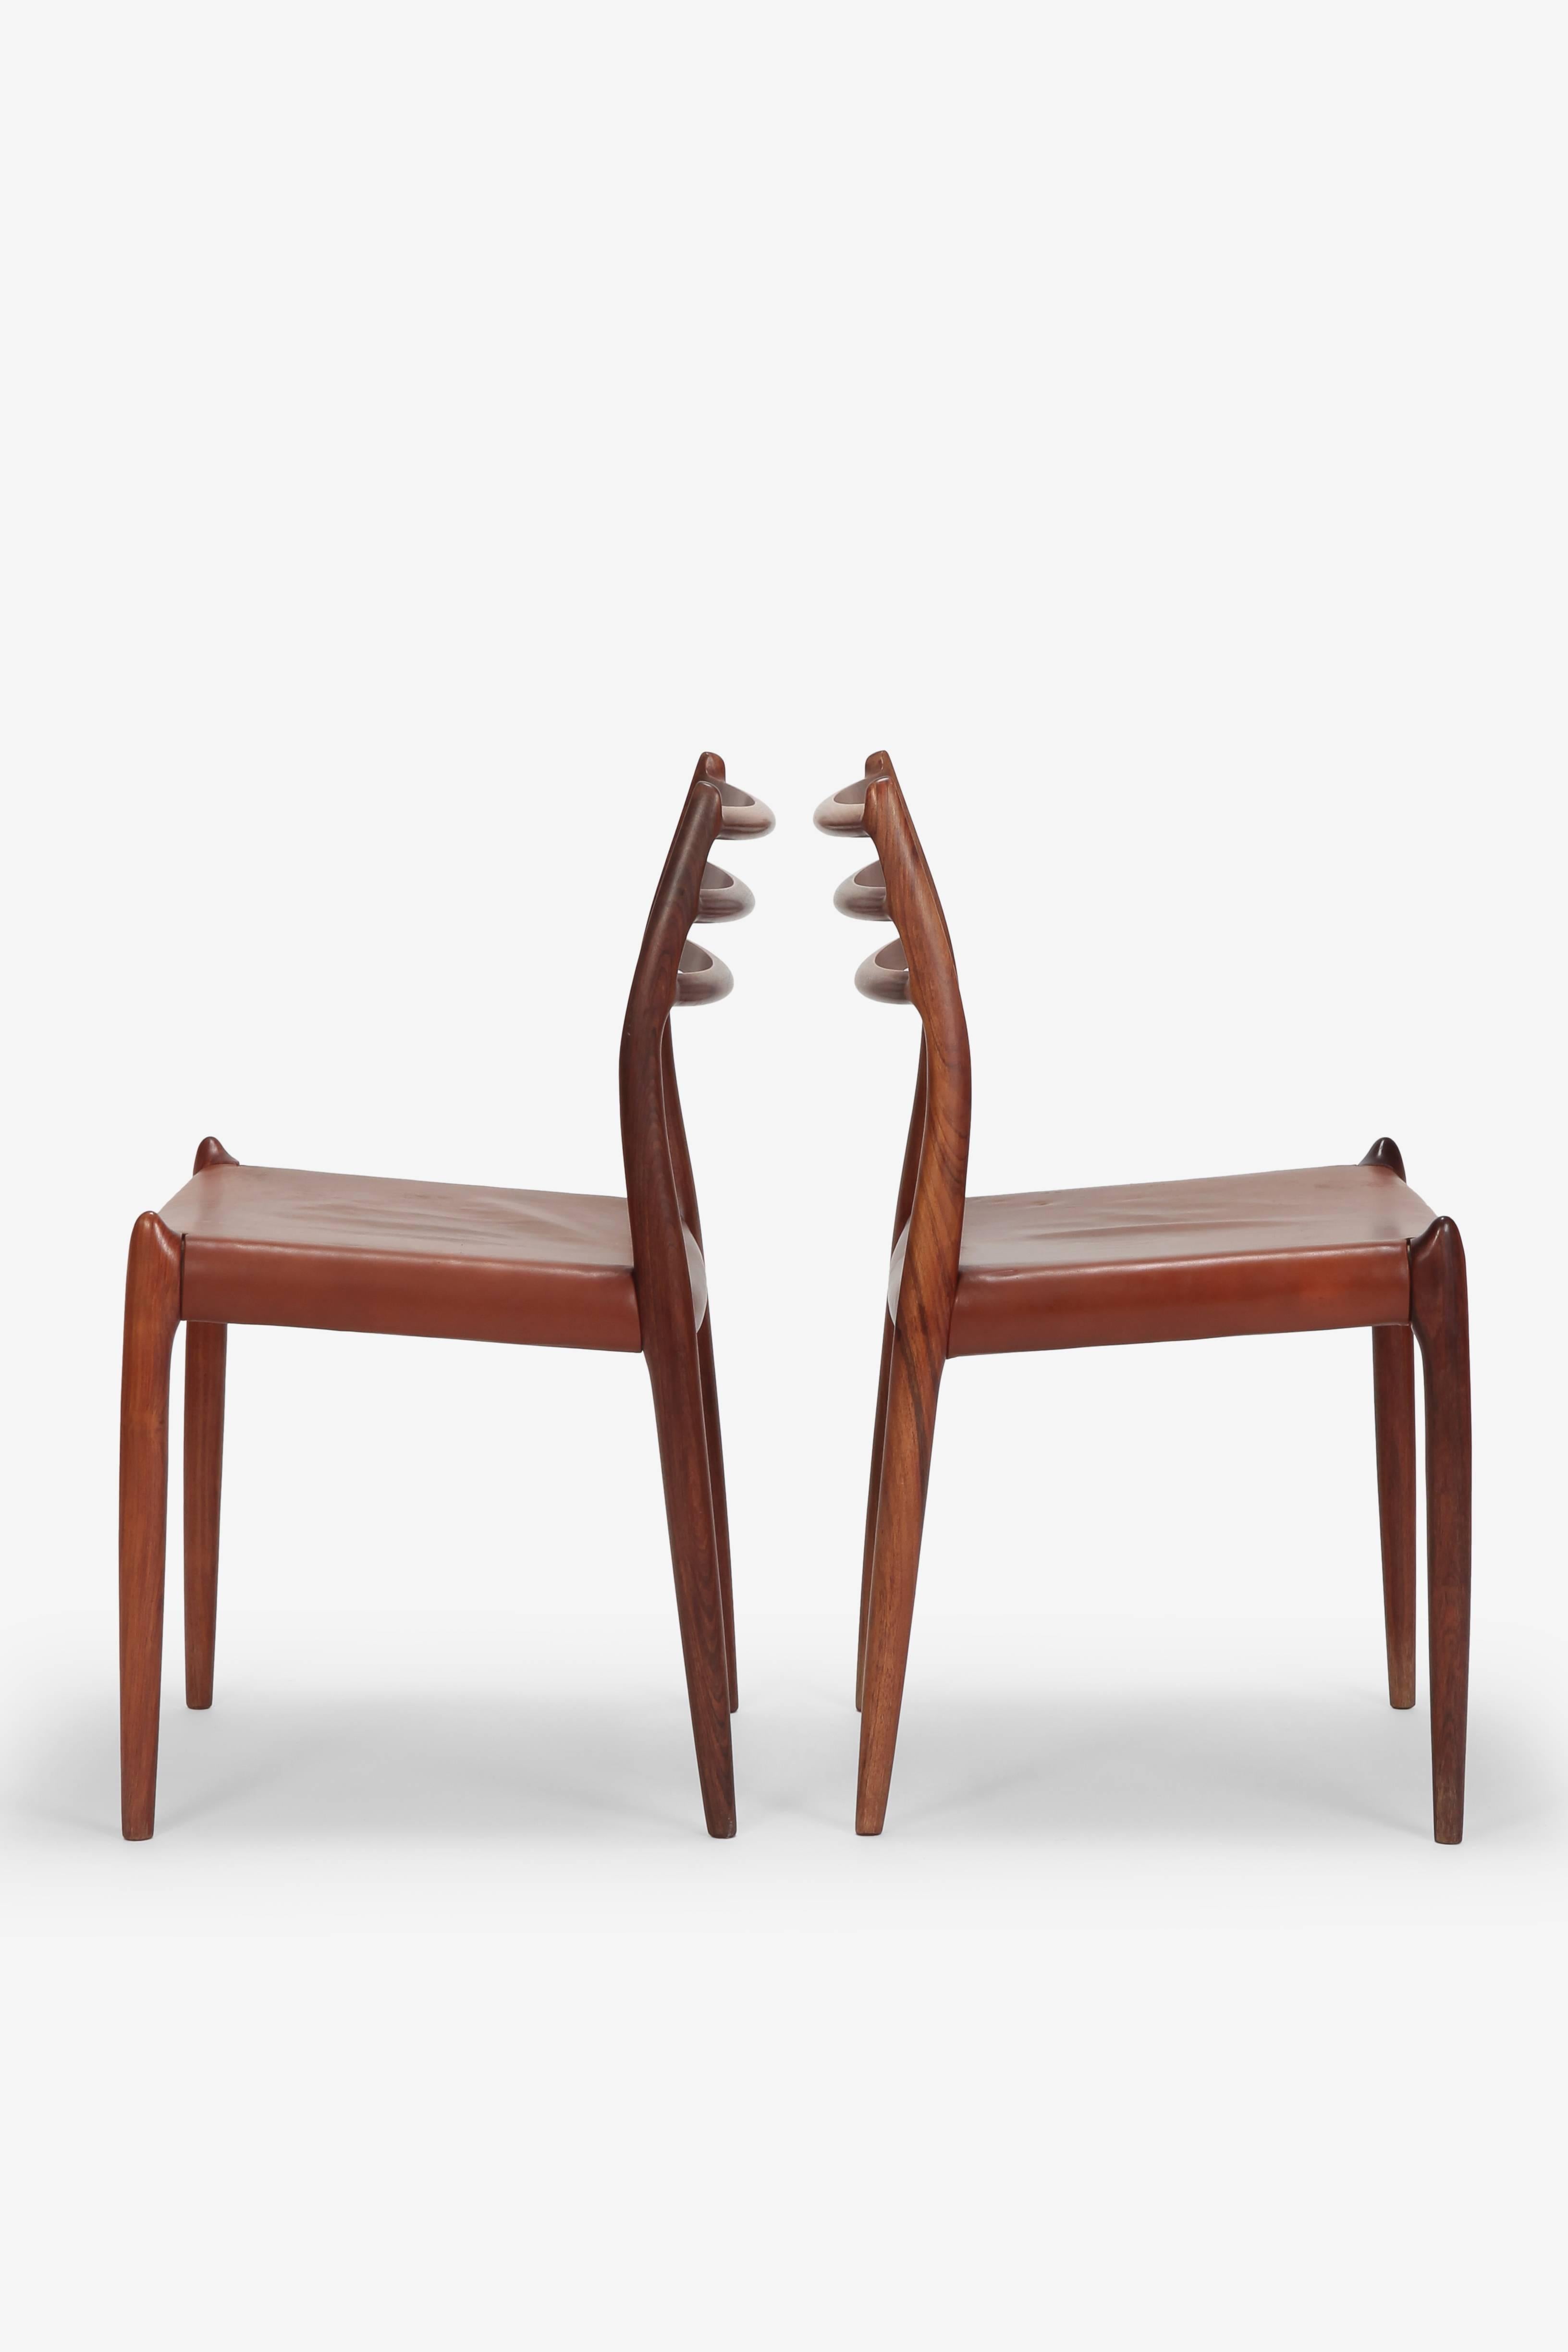 jl moller chairs